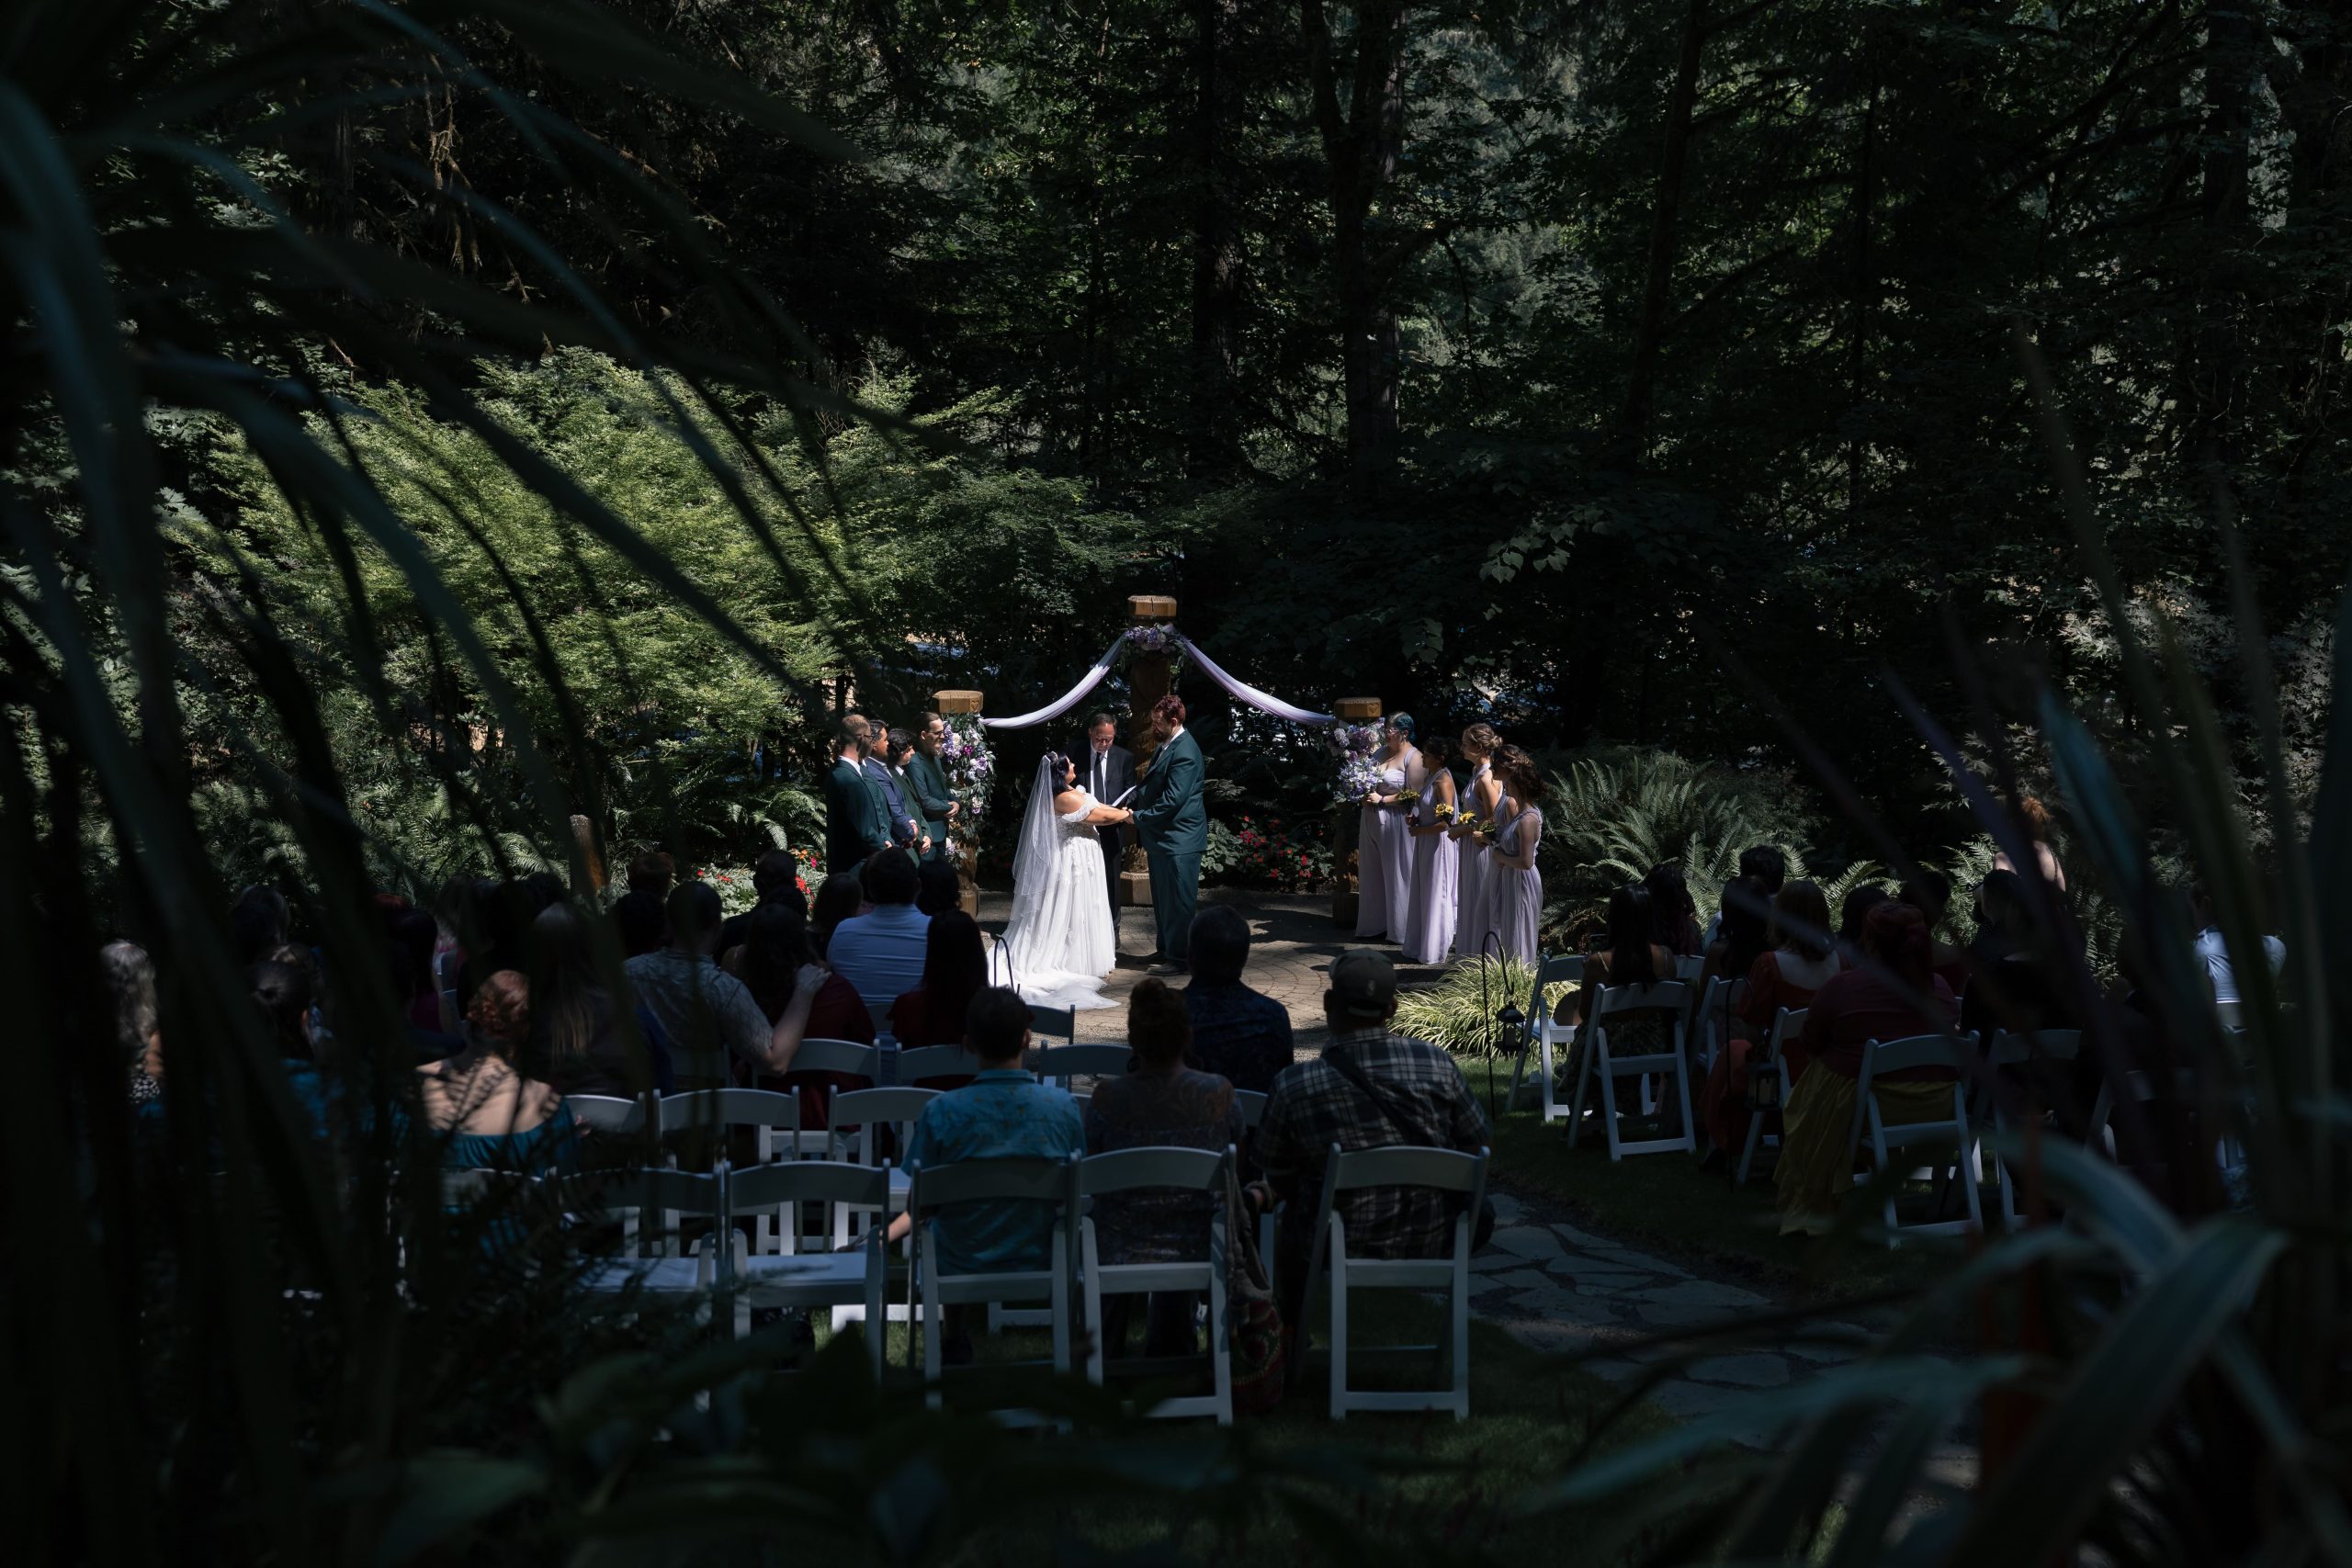 PNW Weddings Excellence Awards 2022 Nominee Acute Lens Photography Oregon